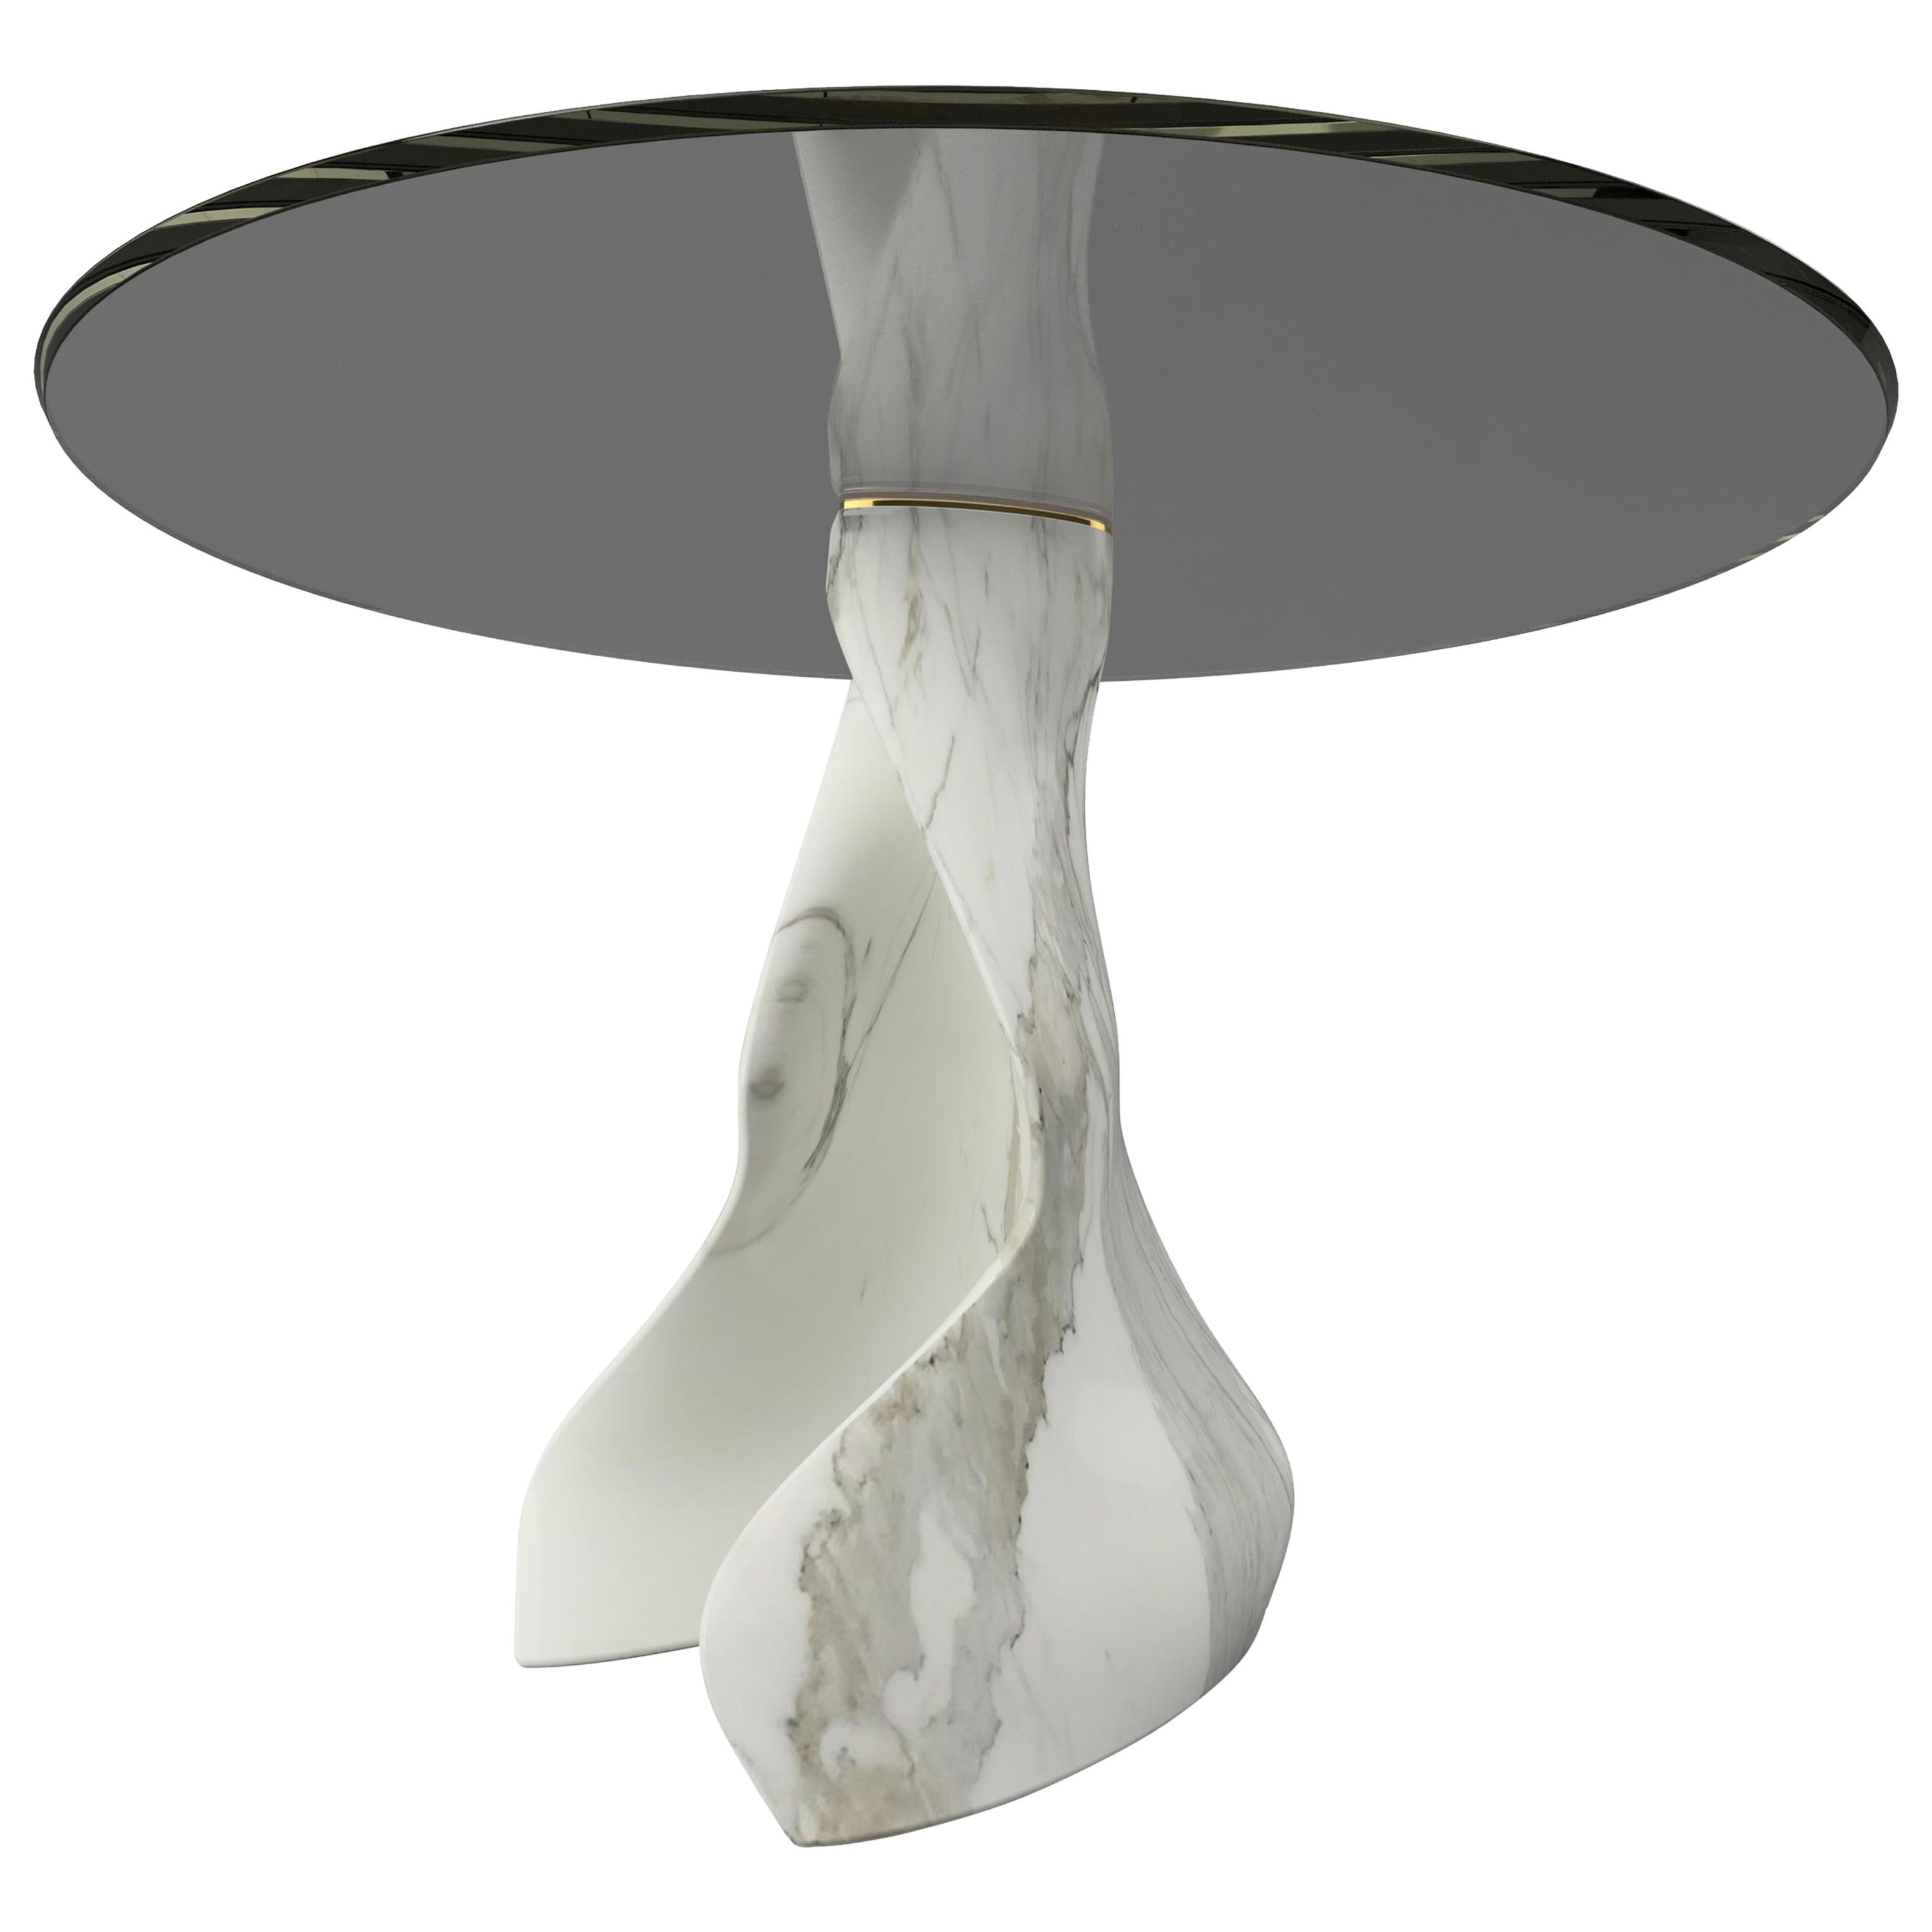 "The Diamond Touch II" Center Table ft.Sculptured Calacatta Marble and Glass For Sale